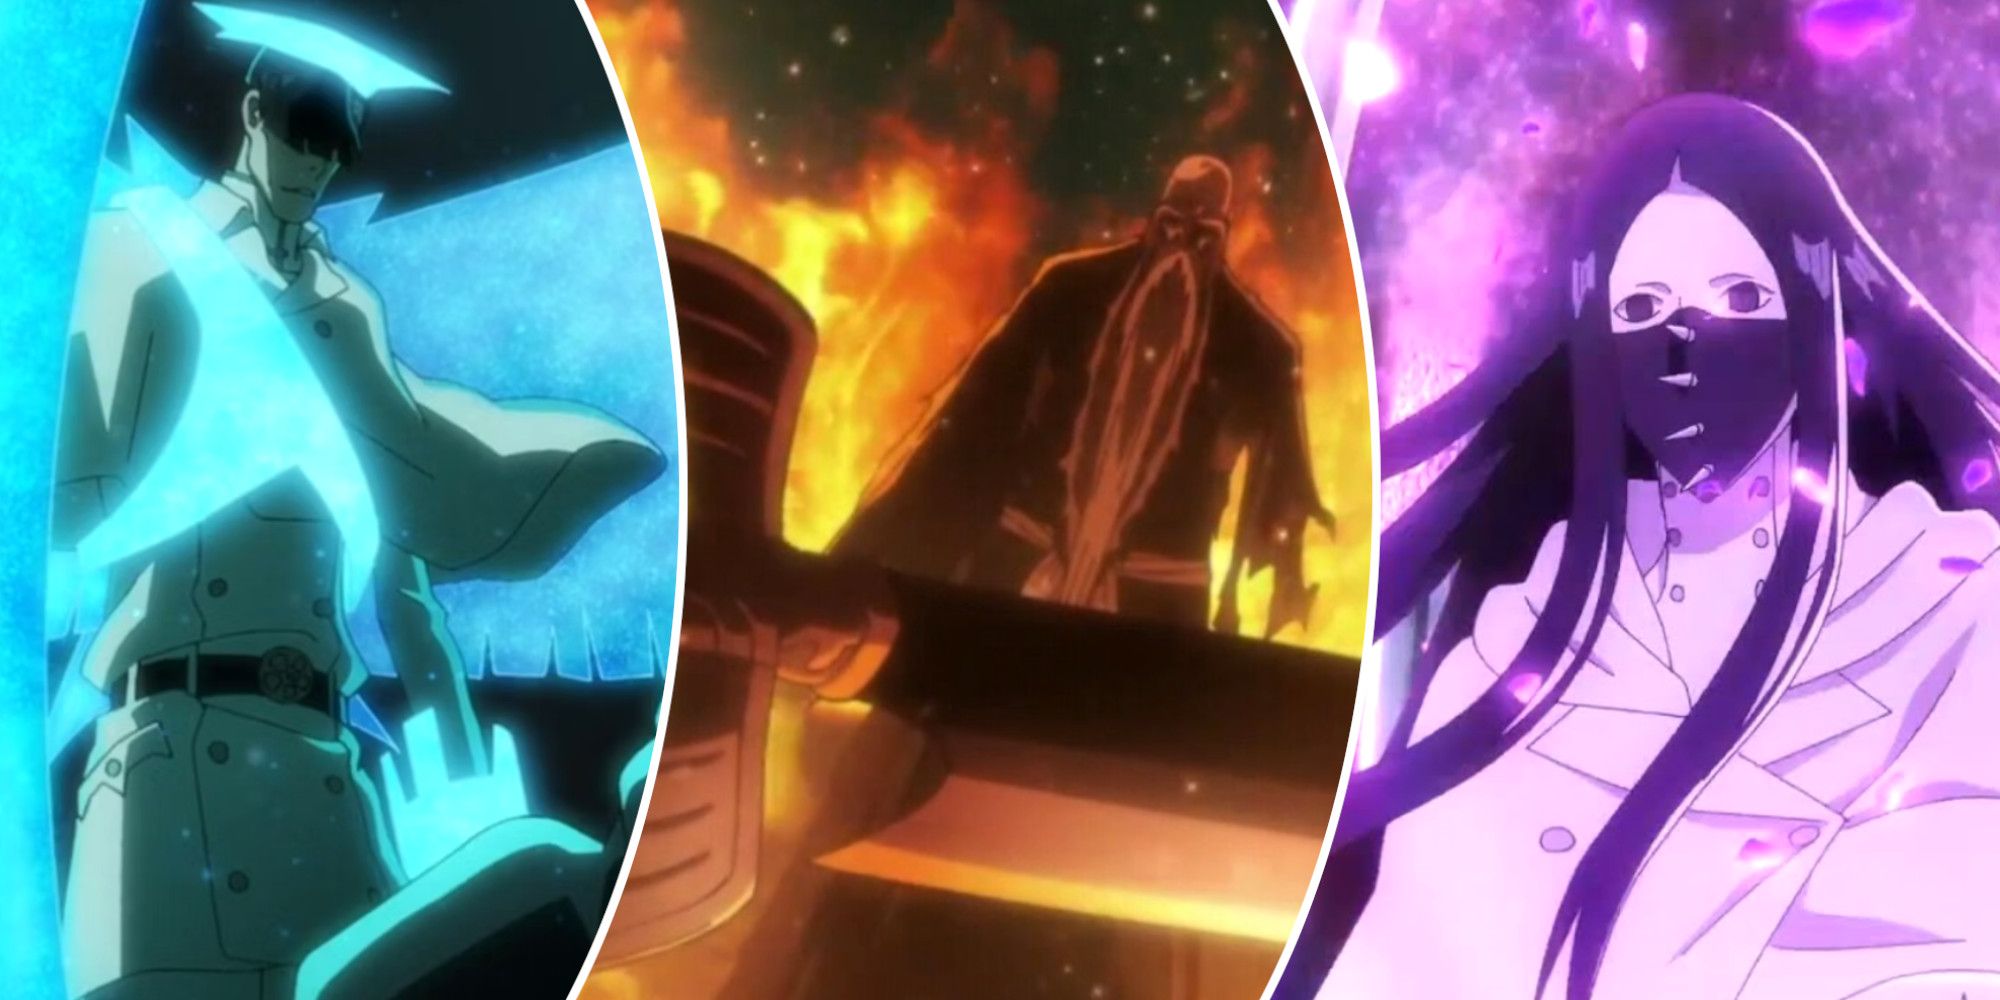 Bleach: Best Fights In Thousand Year Blood War Anime, Ranked